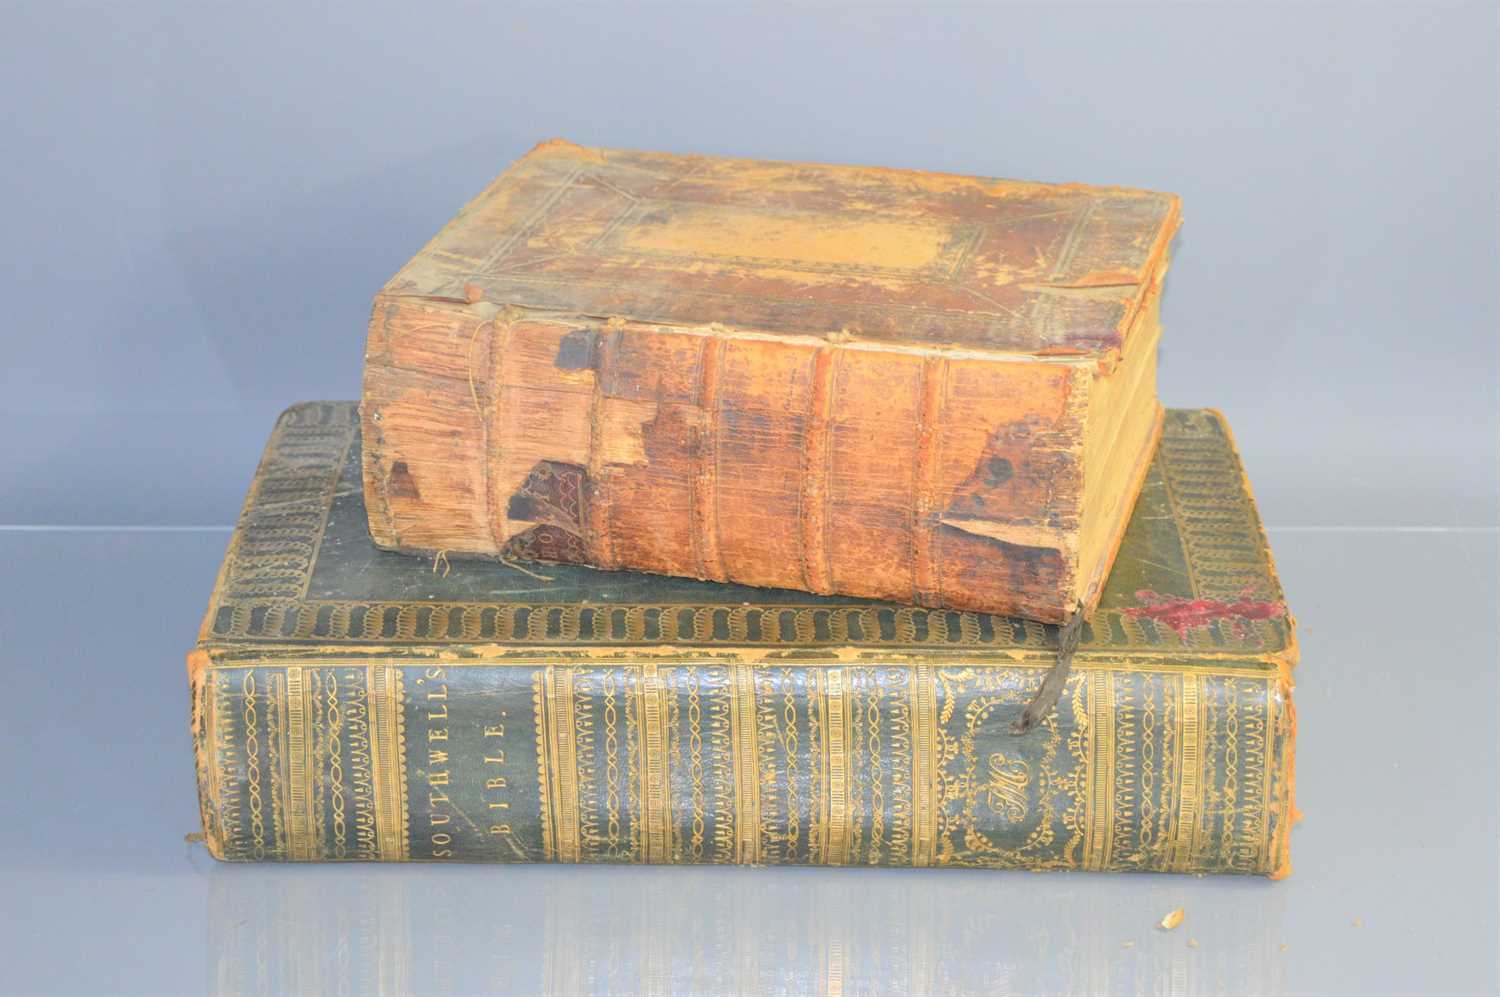 Two 18th century bibles, Southwells family bible 1777 and the book of common prayer printed by